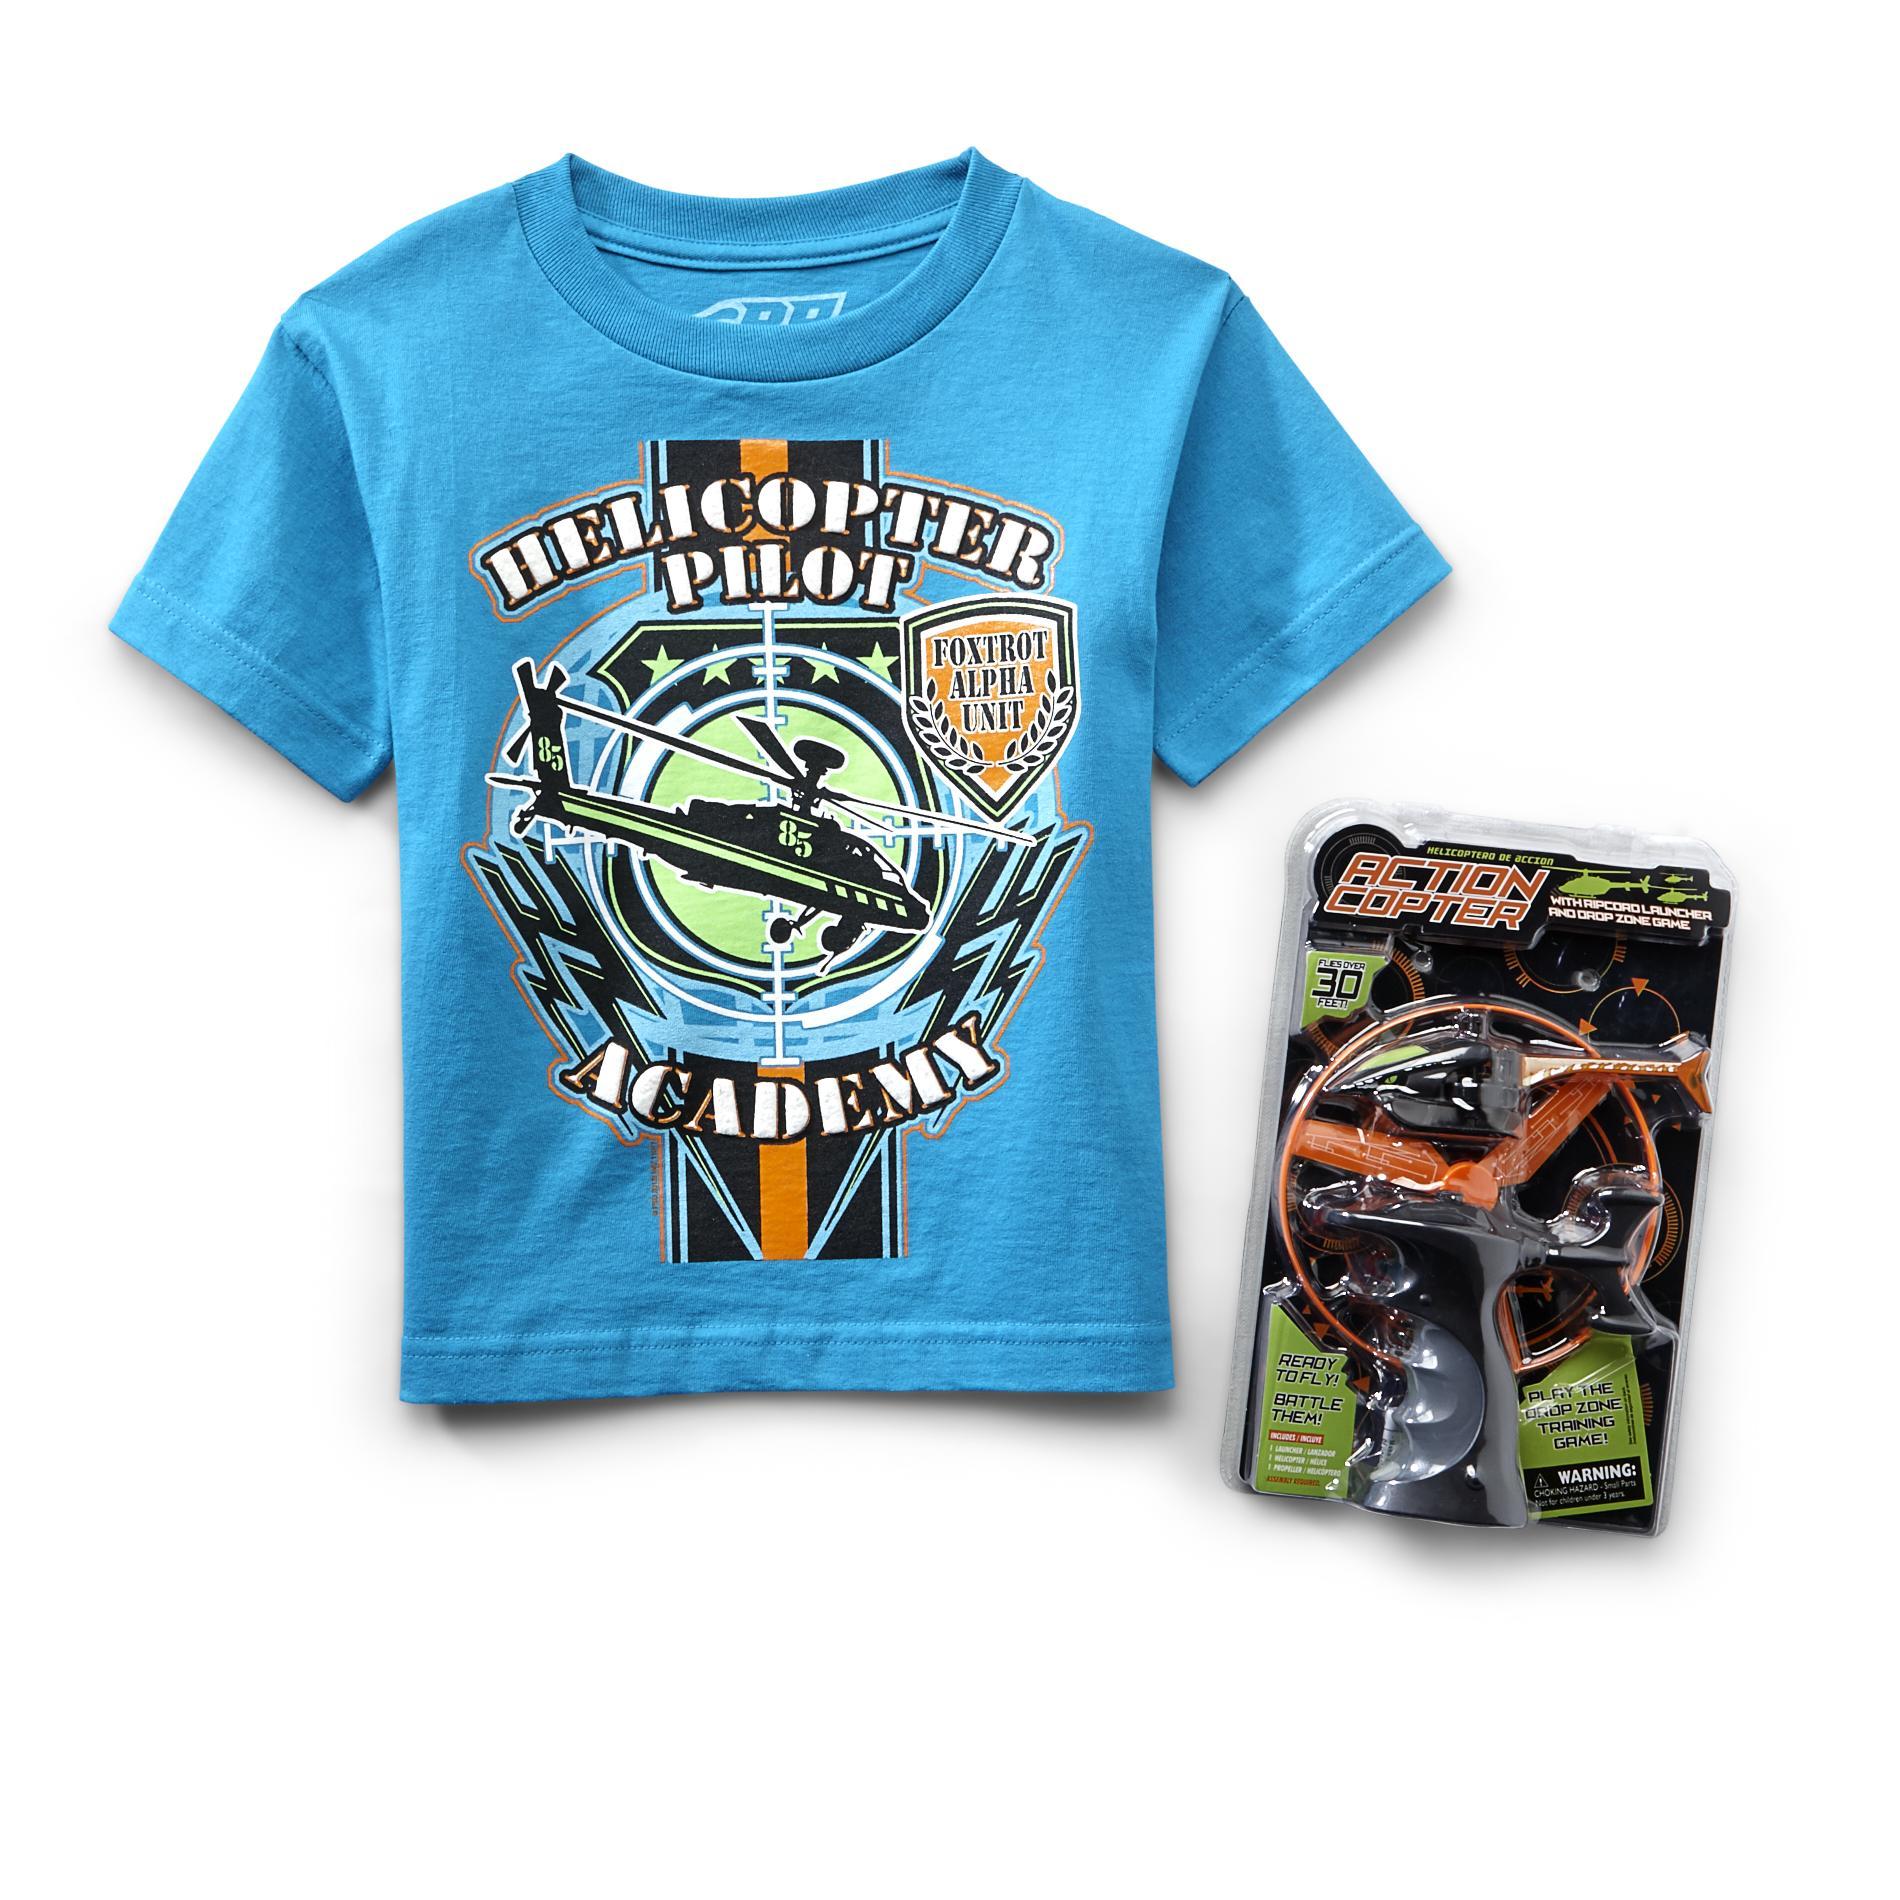 Rudeboyz Boy's Graphic T-Shirt & Helicopter Toy